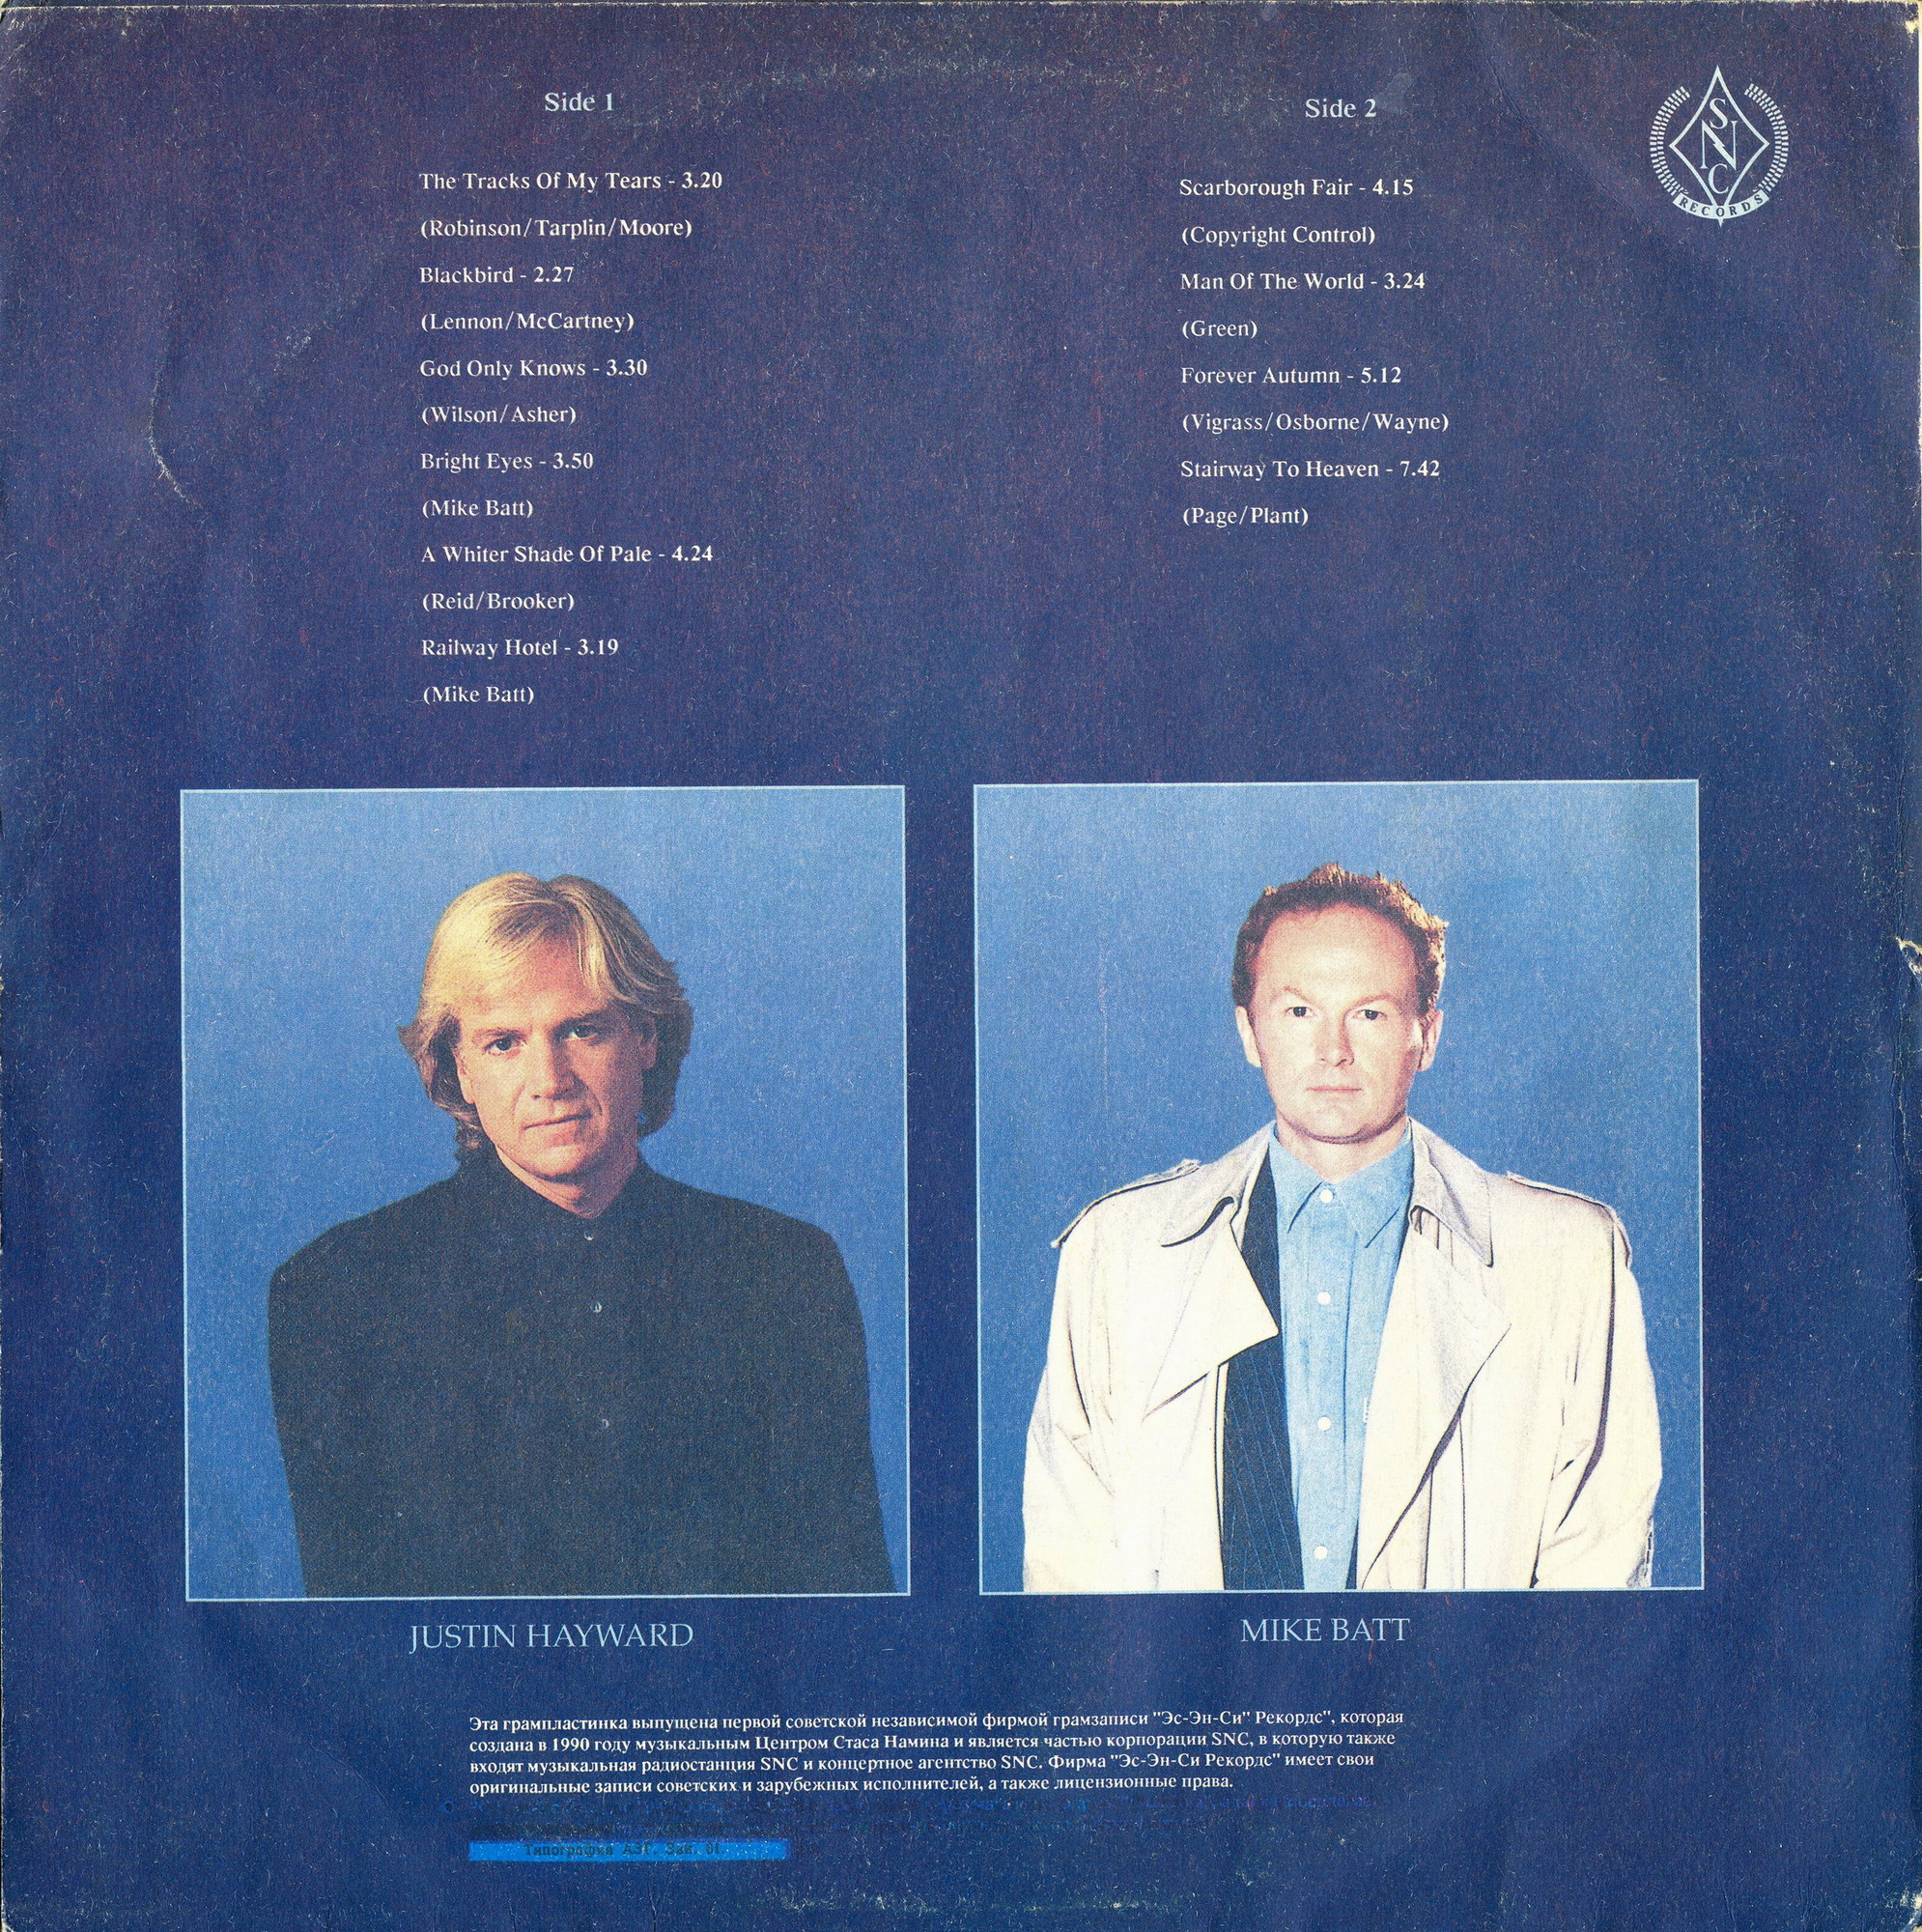 CLASSIC BLUE (A Collection Of Classic Songs). Justin Hayward With Mike Batt and the London Philharmonic Orchestra